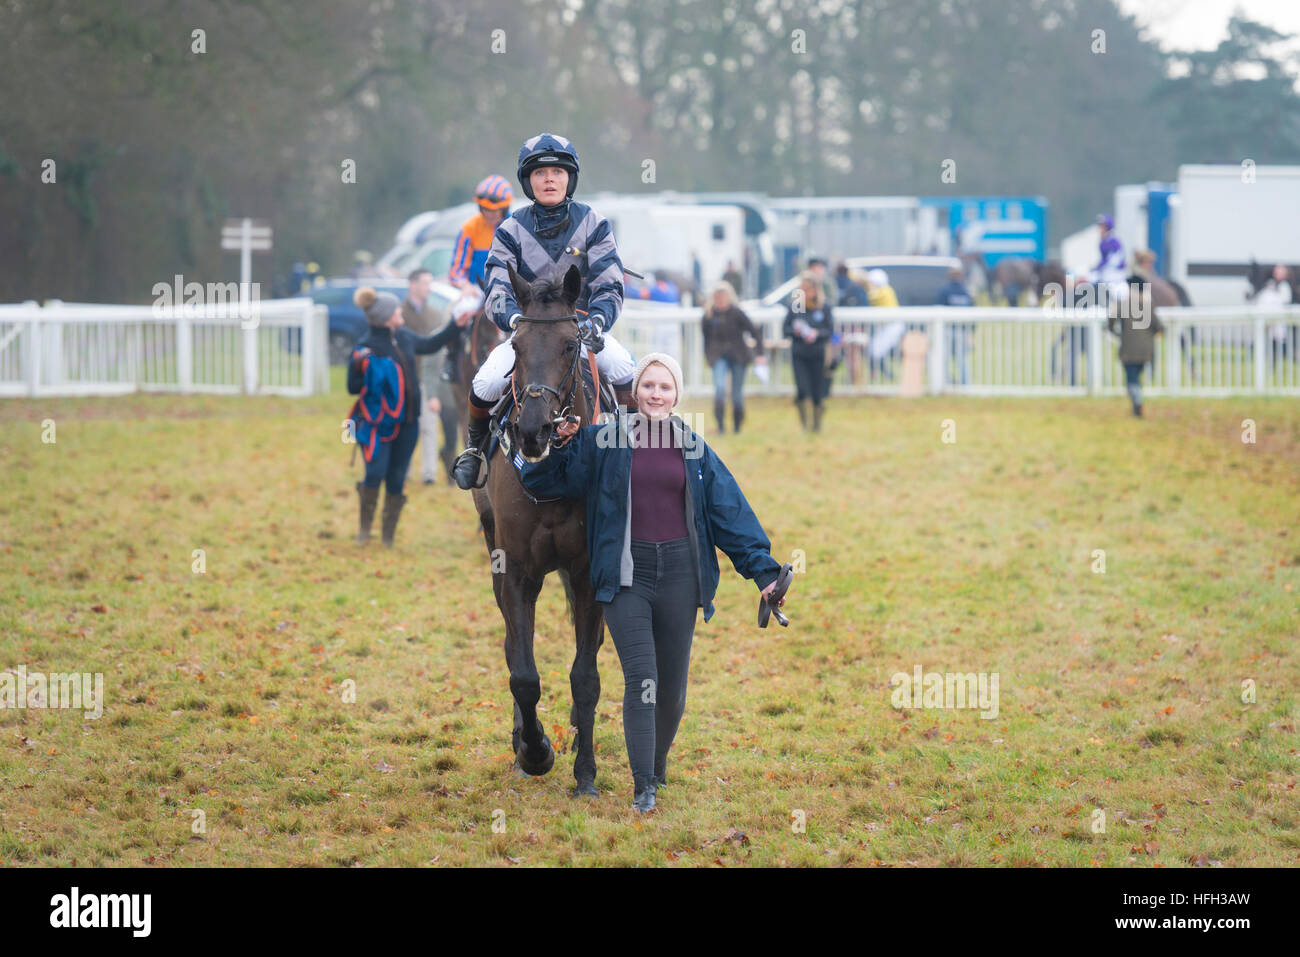 Cottenham Cambridgeshire, UK. 31st Dec, 2016. Victoria Pendleton rides Vesperal Dream in the Countryside Alliance Club Members Race for Novice Riders coming second at the Cambridgeshire Harriers Hunt Club Point-to-Point race meeting. There were seven races at the New Year's Eve meeting. Credit Julian Eales/Alamy Live New Stock Photo